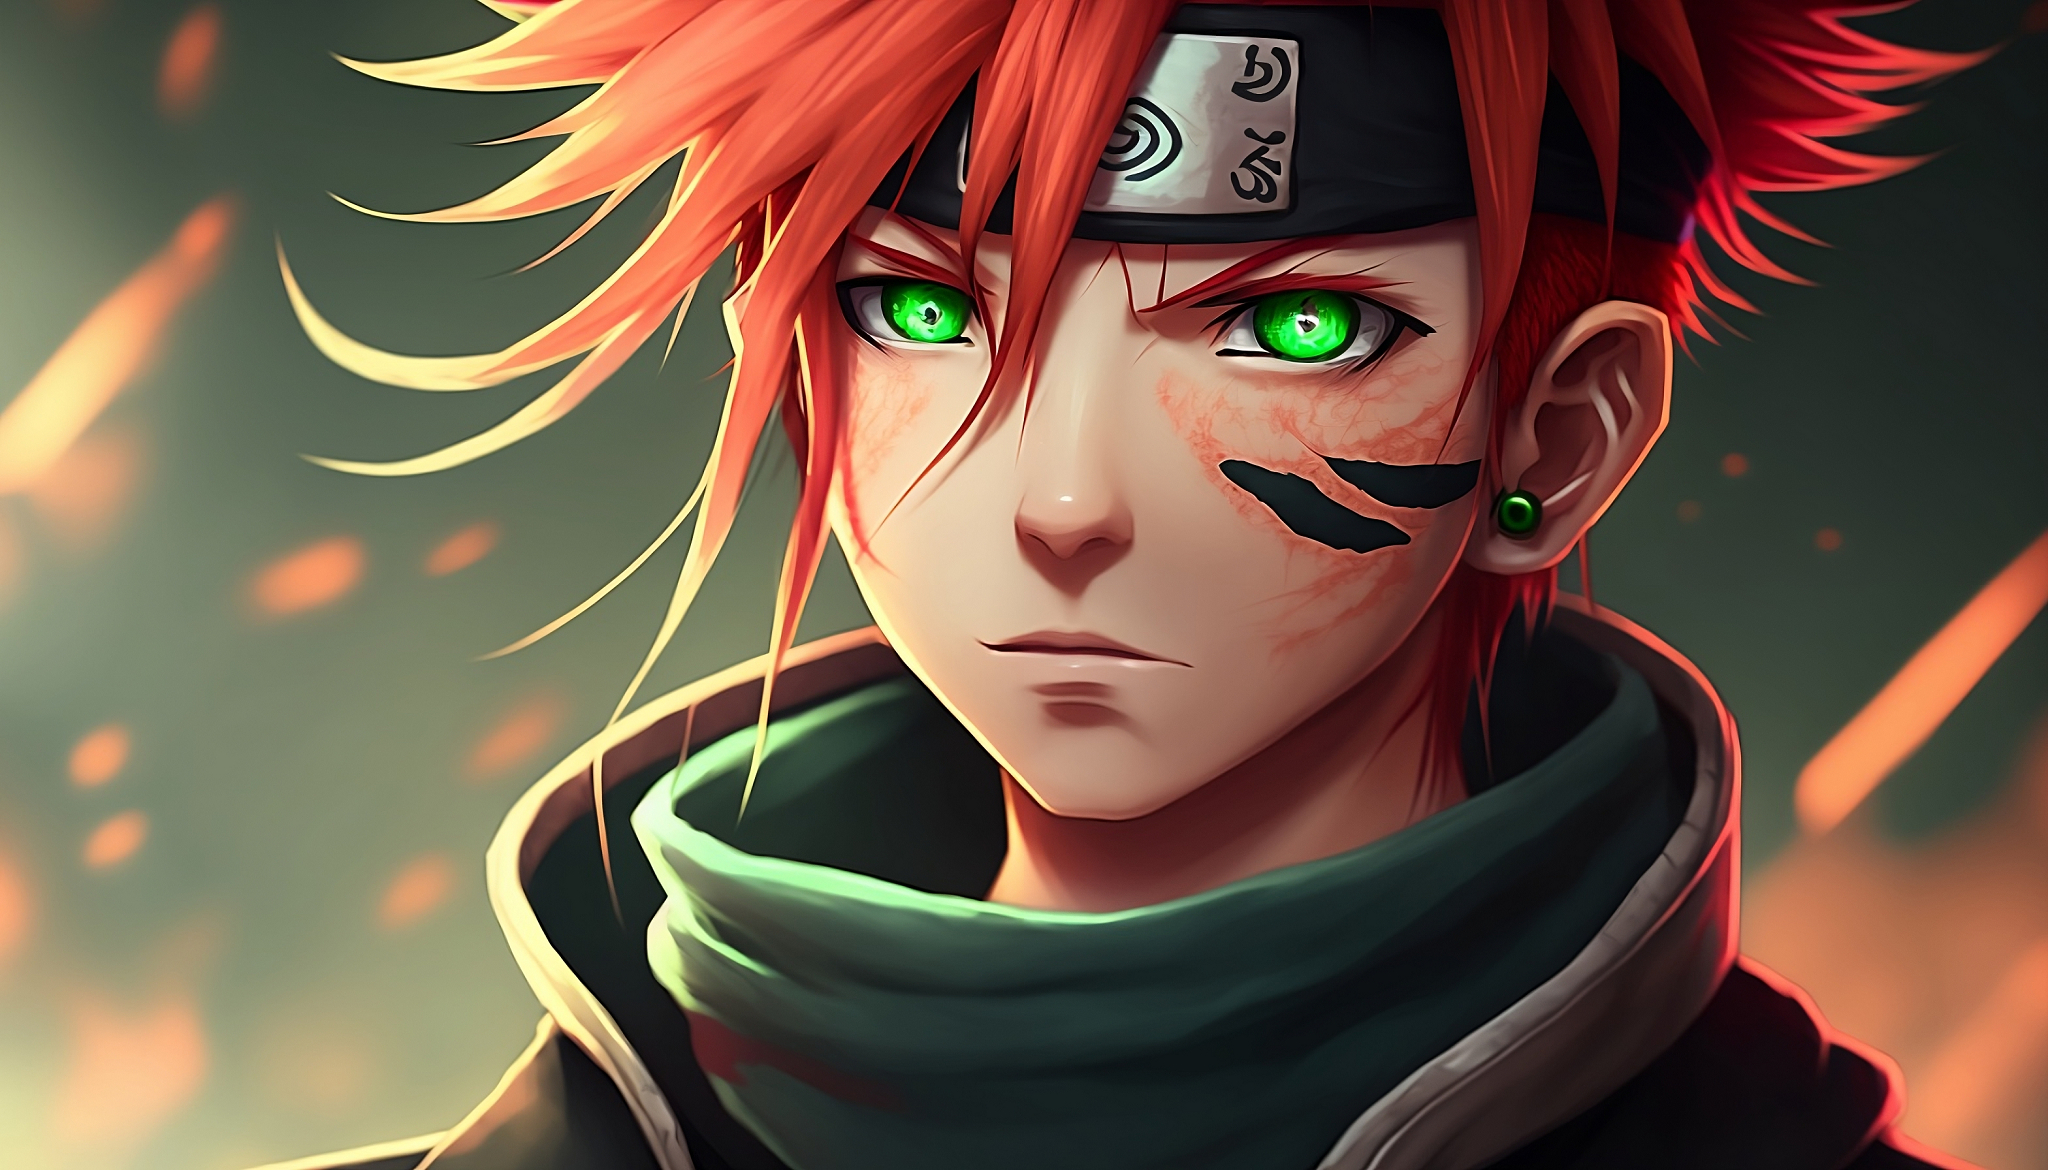 Naruto HD Wallpapers | 4K Backgrounds - Wallpapers Den